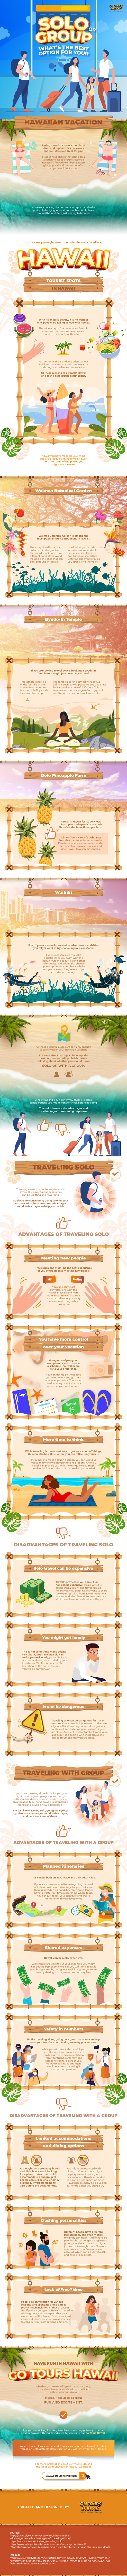 Solo-or-Group-What’s-the-Best-Option-for-your-Hawaiian-Vacation-infographic-image-HF